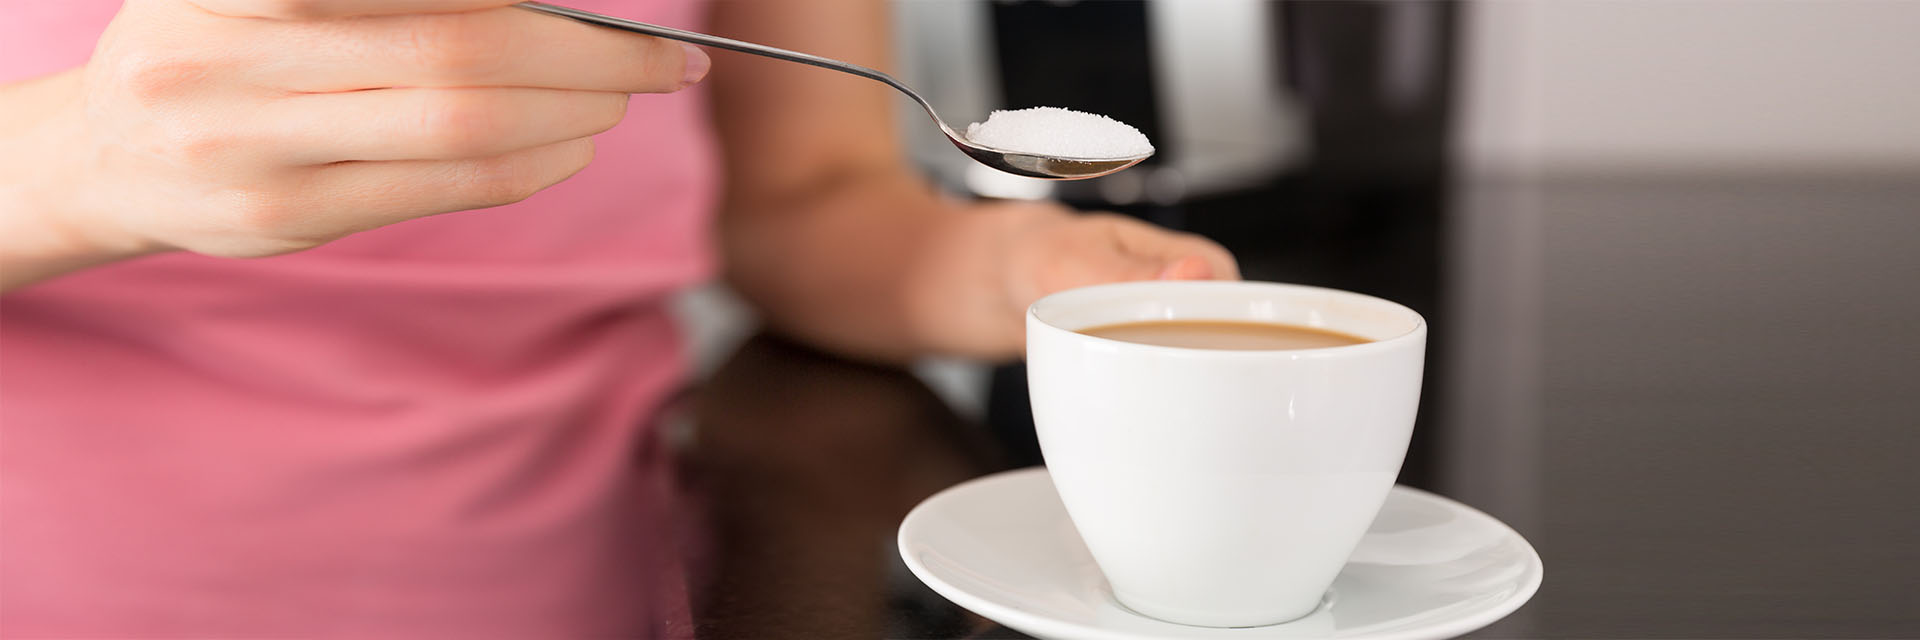 Woman's hand holding coffee cup and a spoonful of sweetener